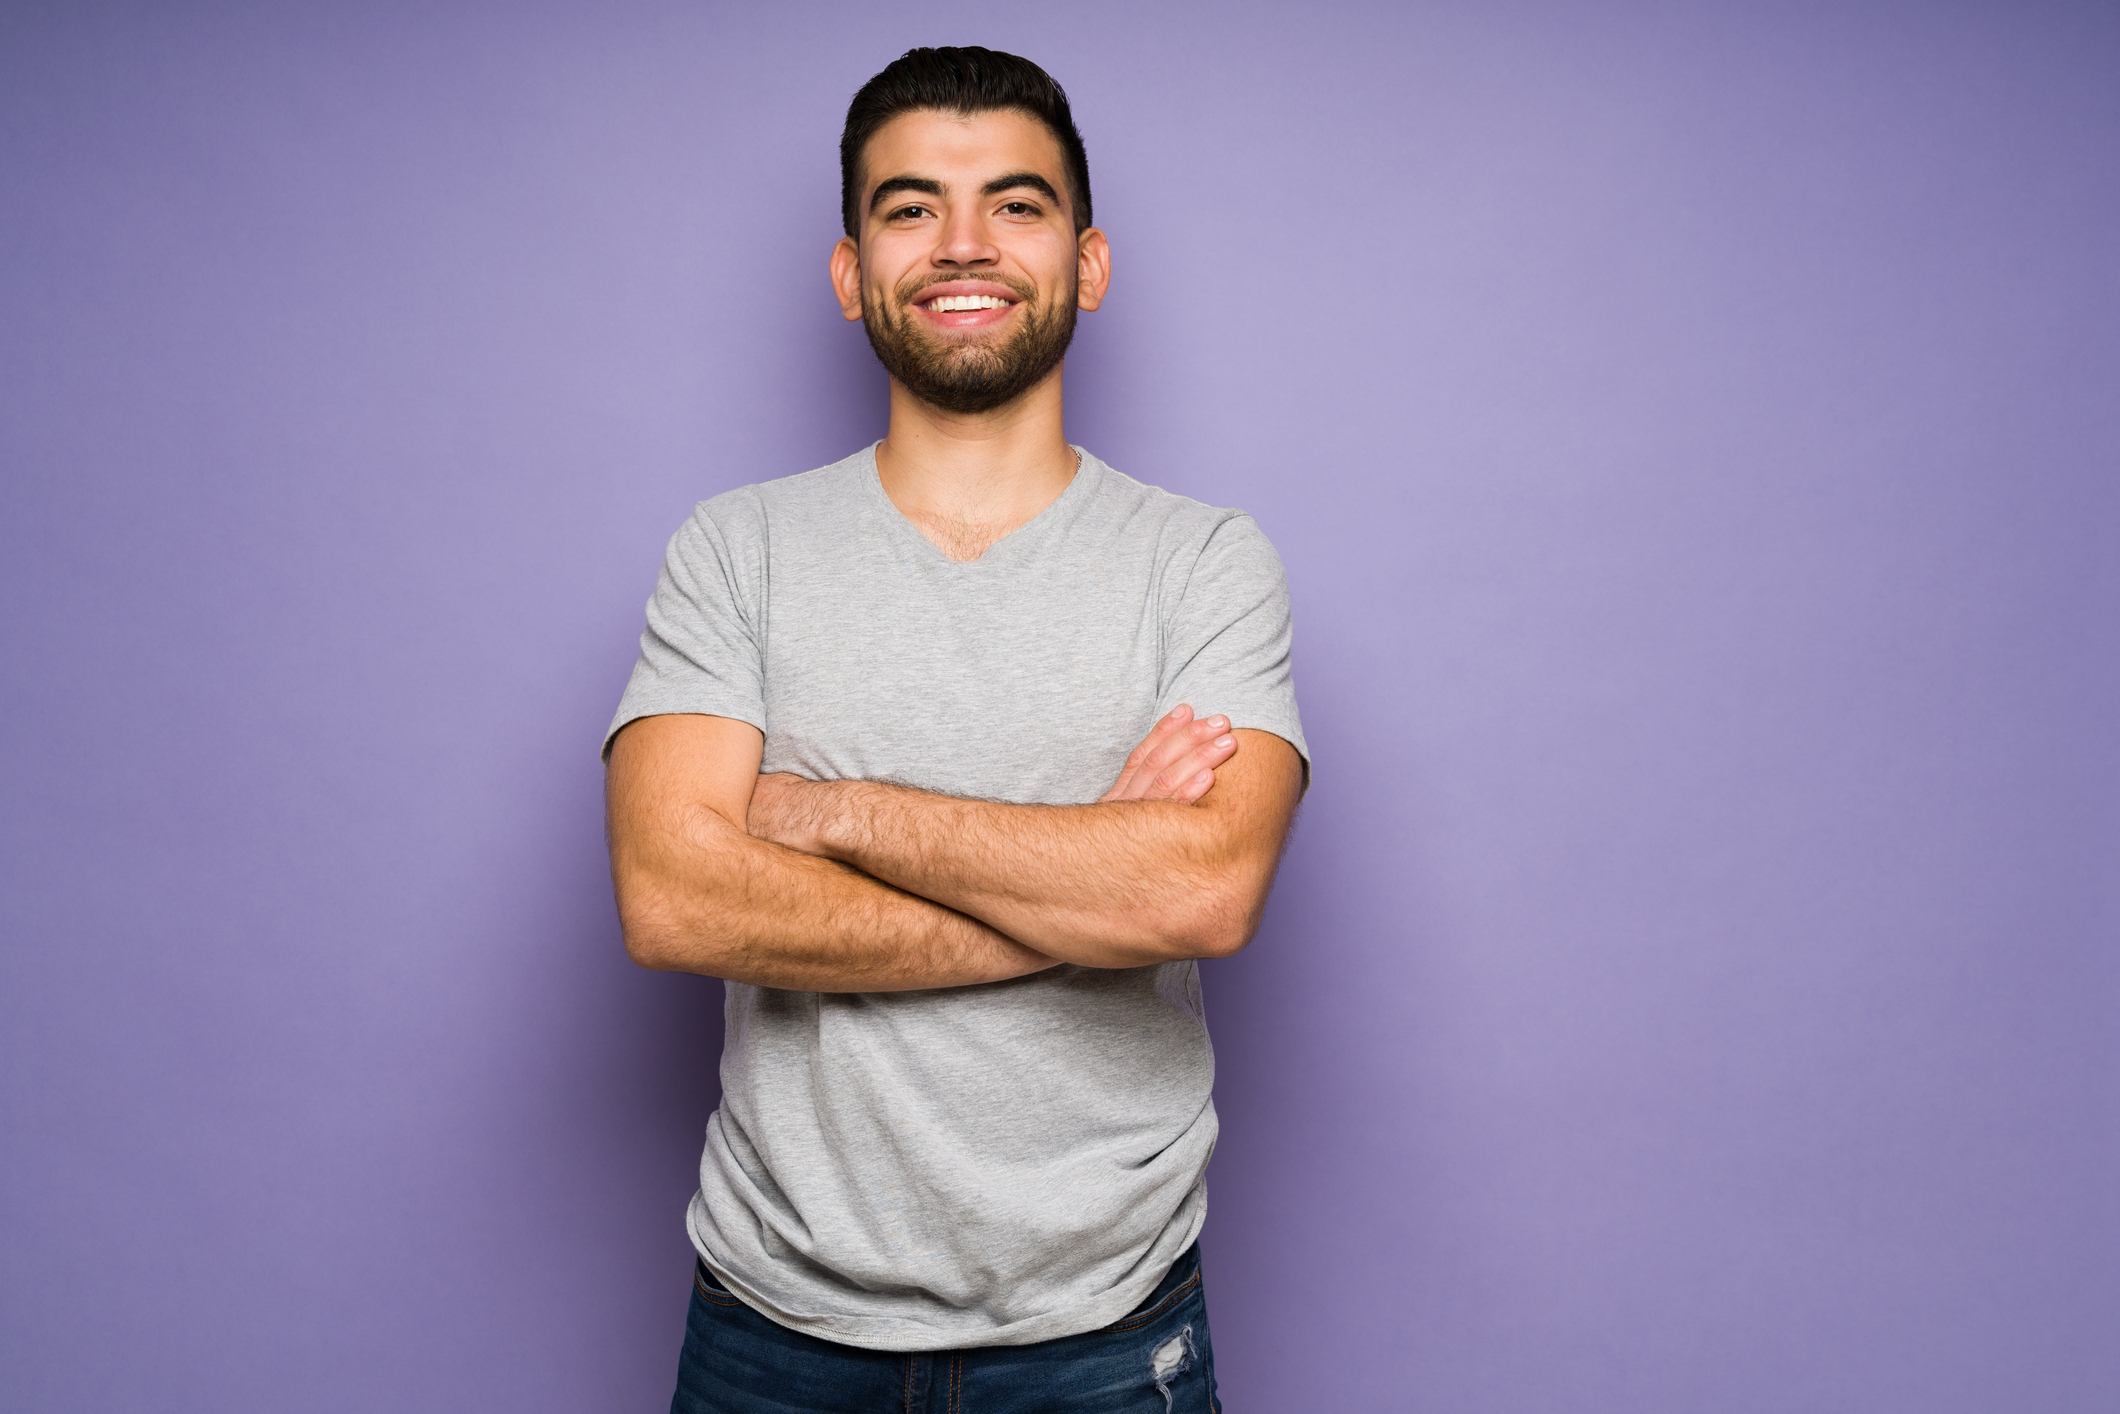 Attractive man looking cheerful on purple background